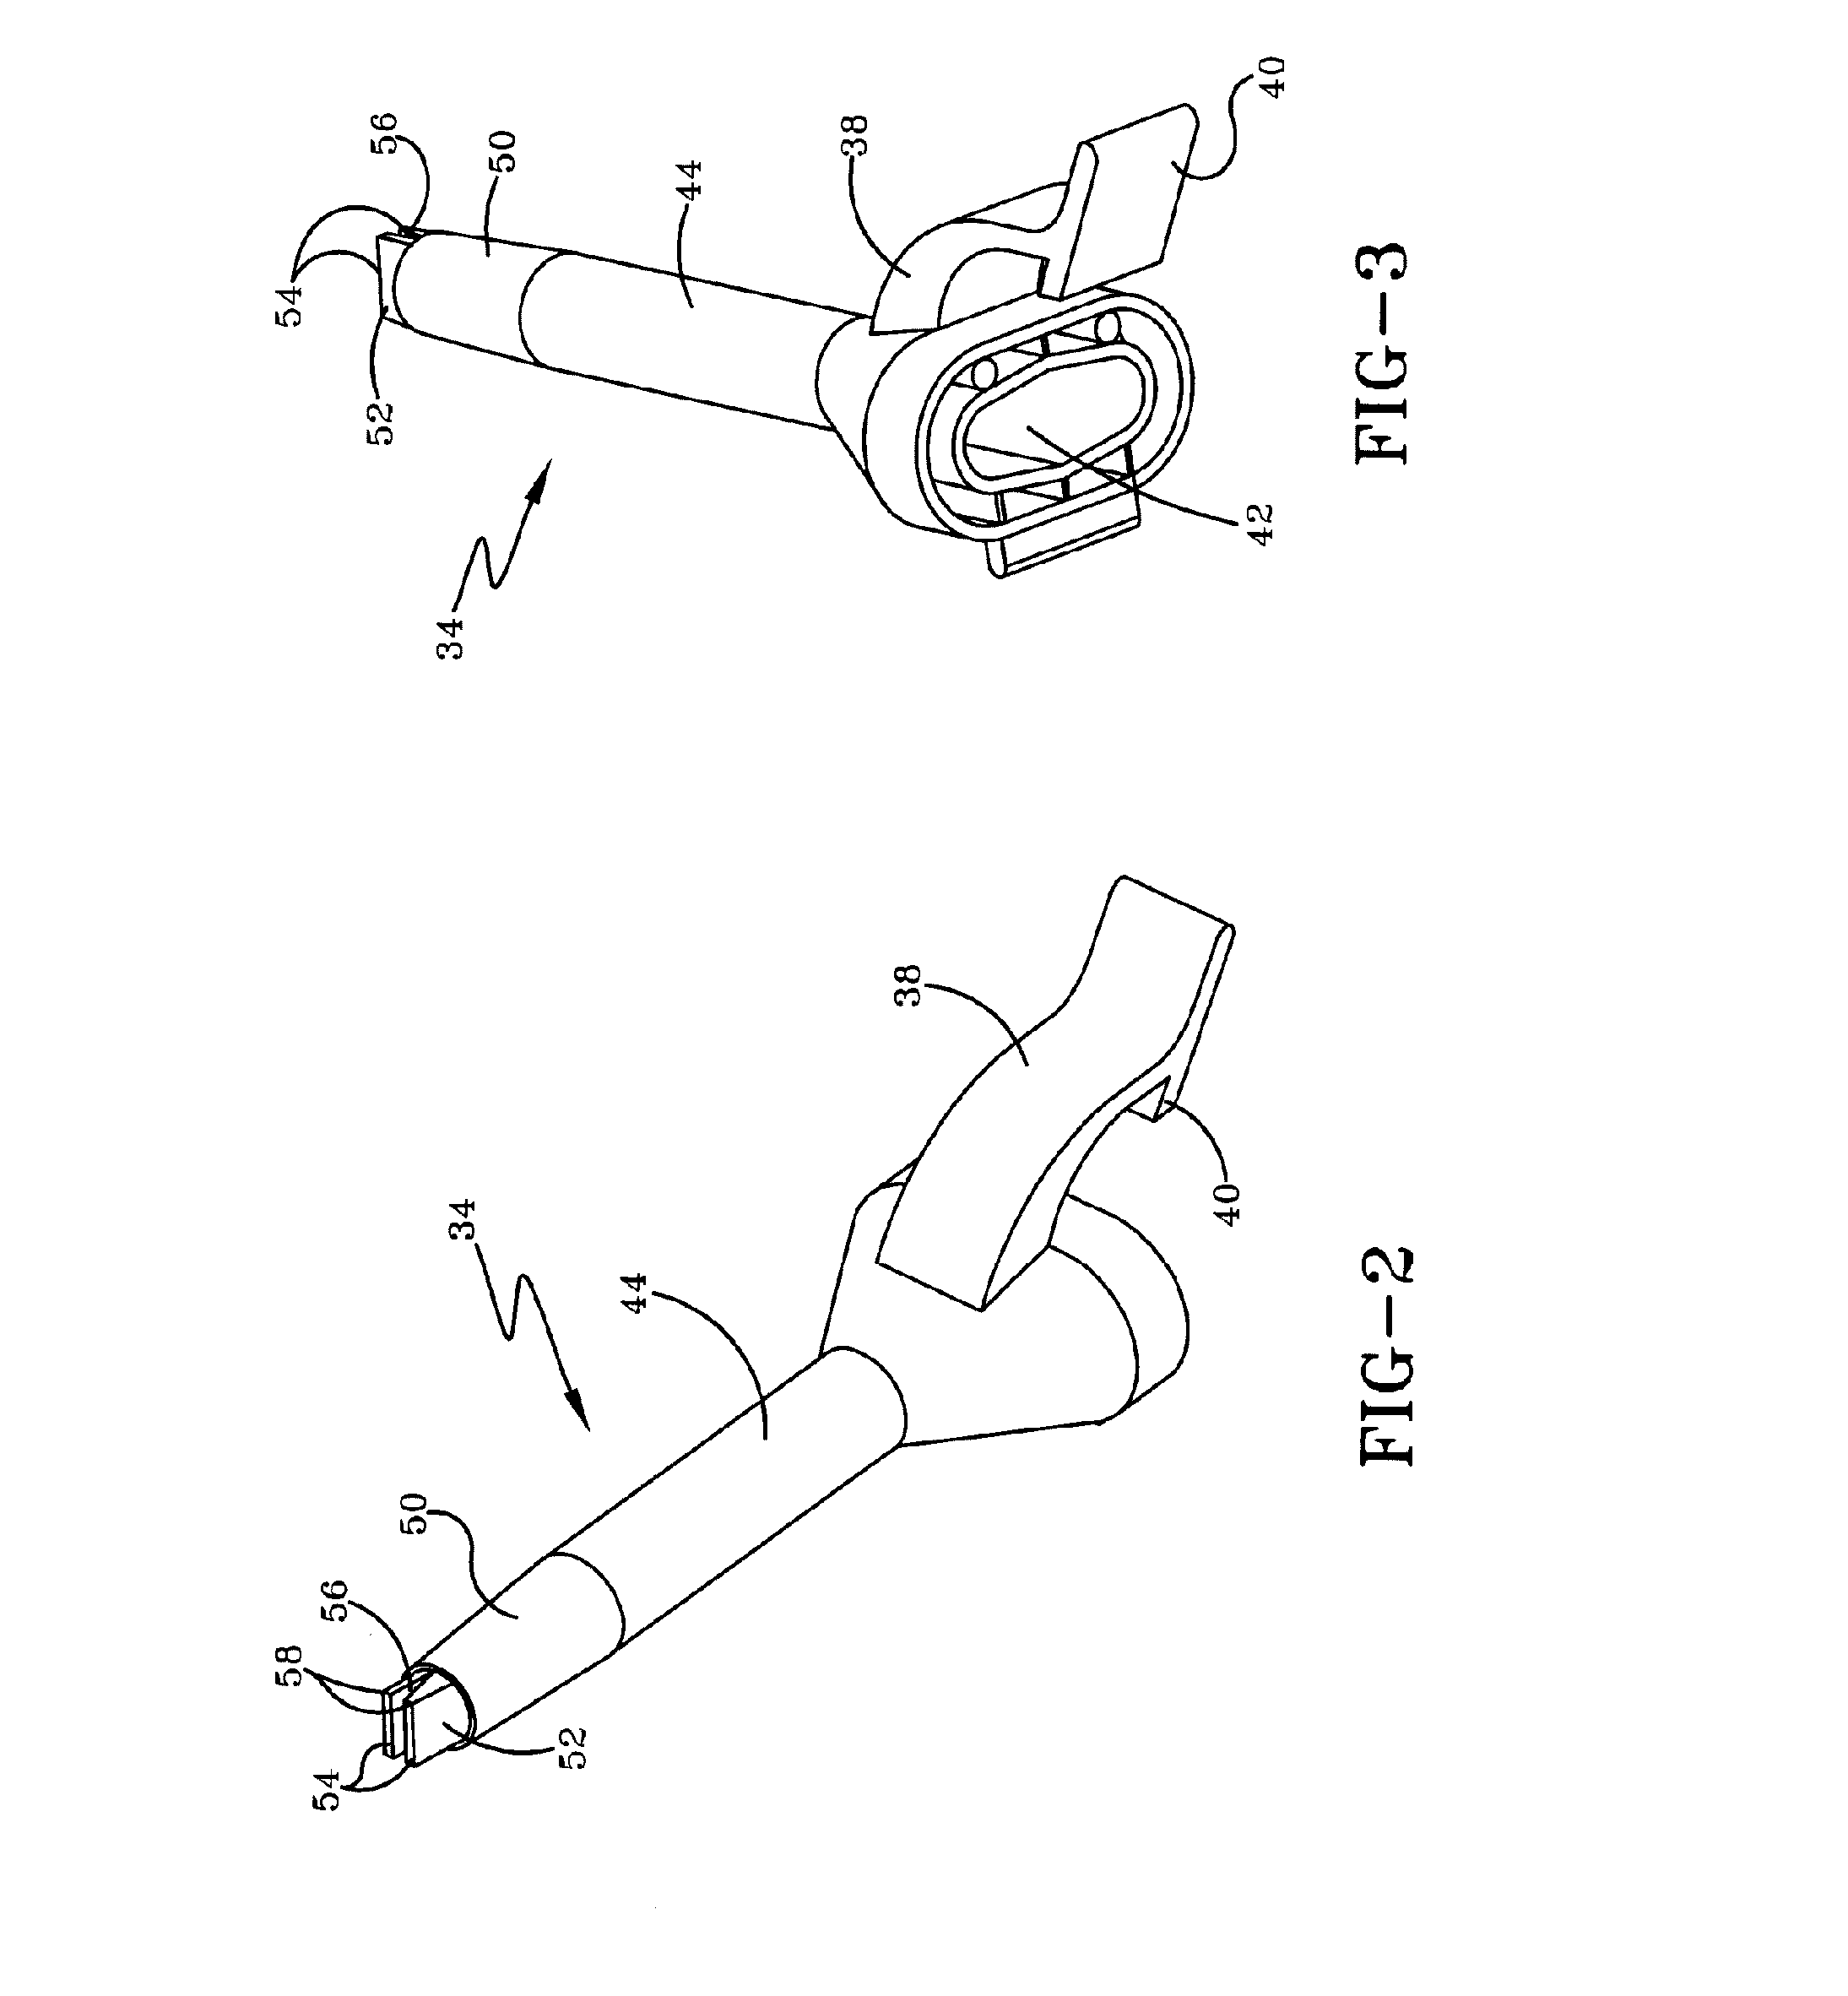 Method for Rapid Insulation of Expanses